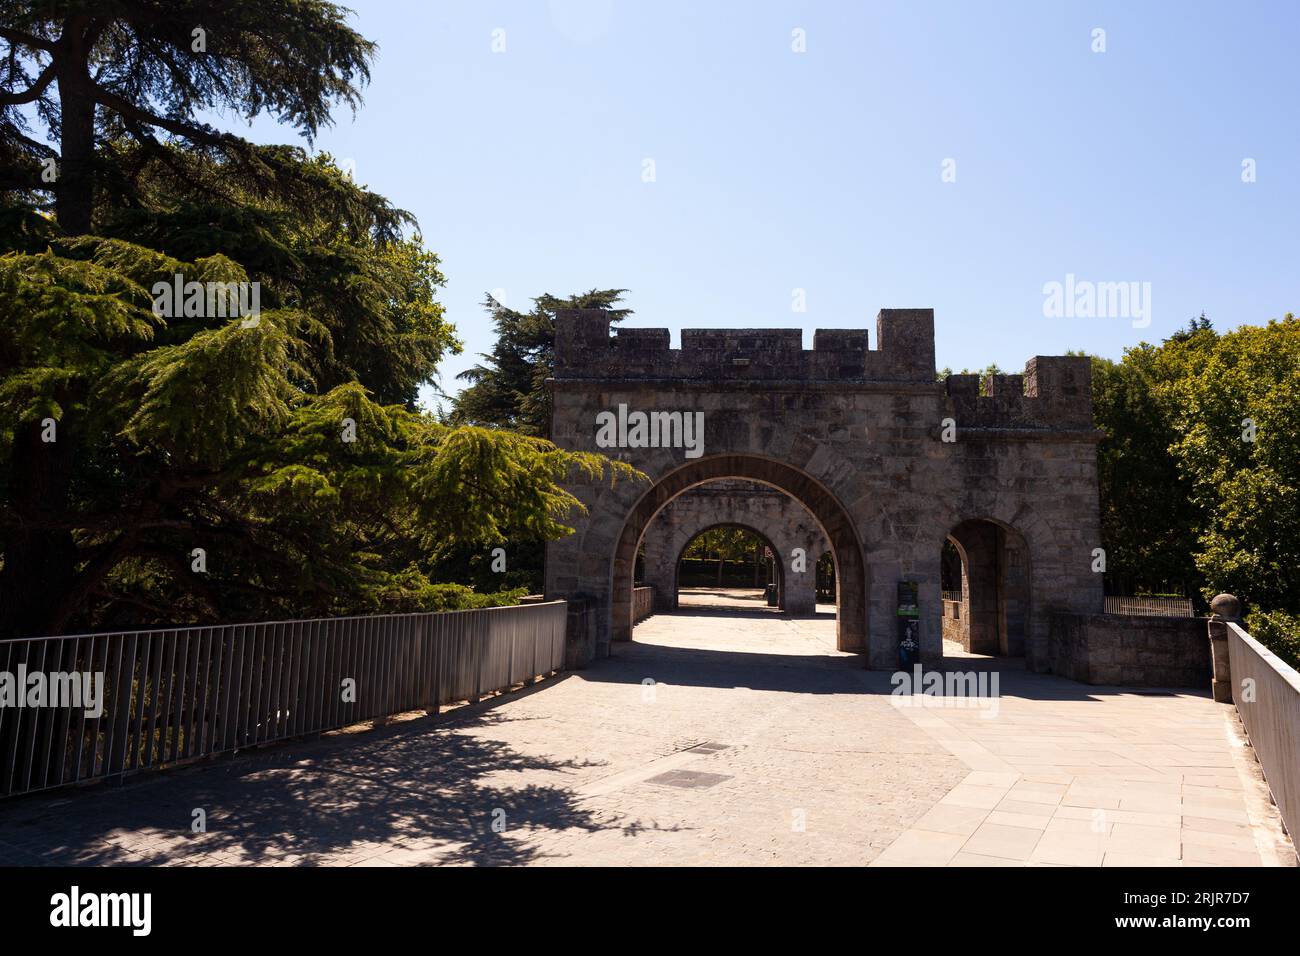 View of the City wall gate and path in Pamplona, Spain Stock Photo